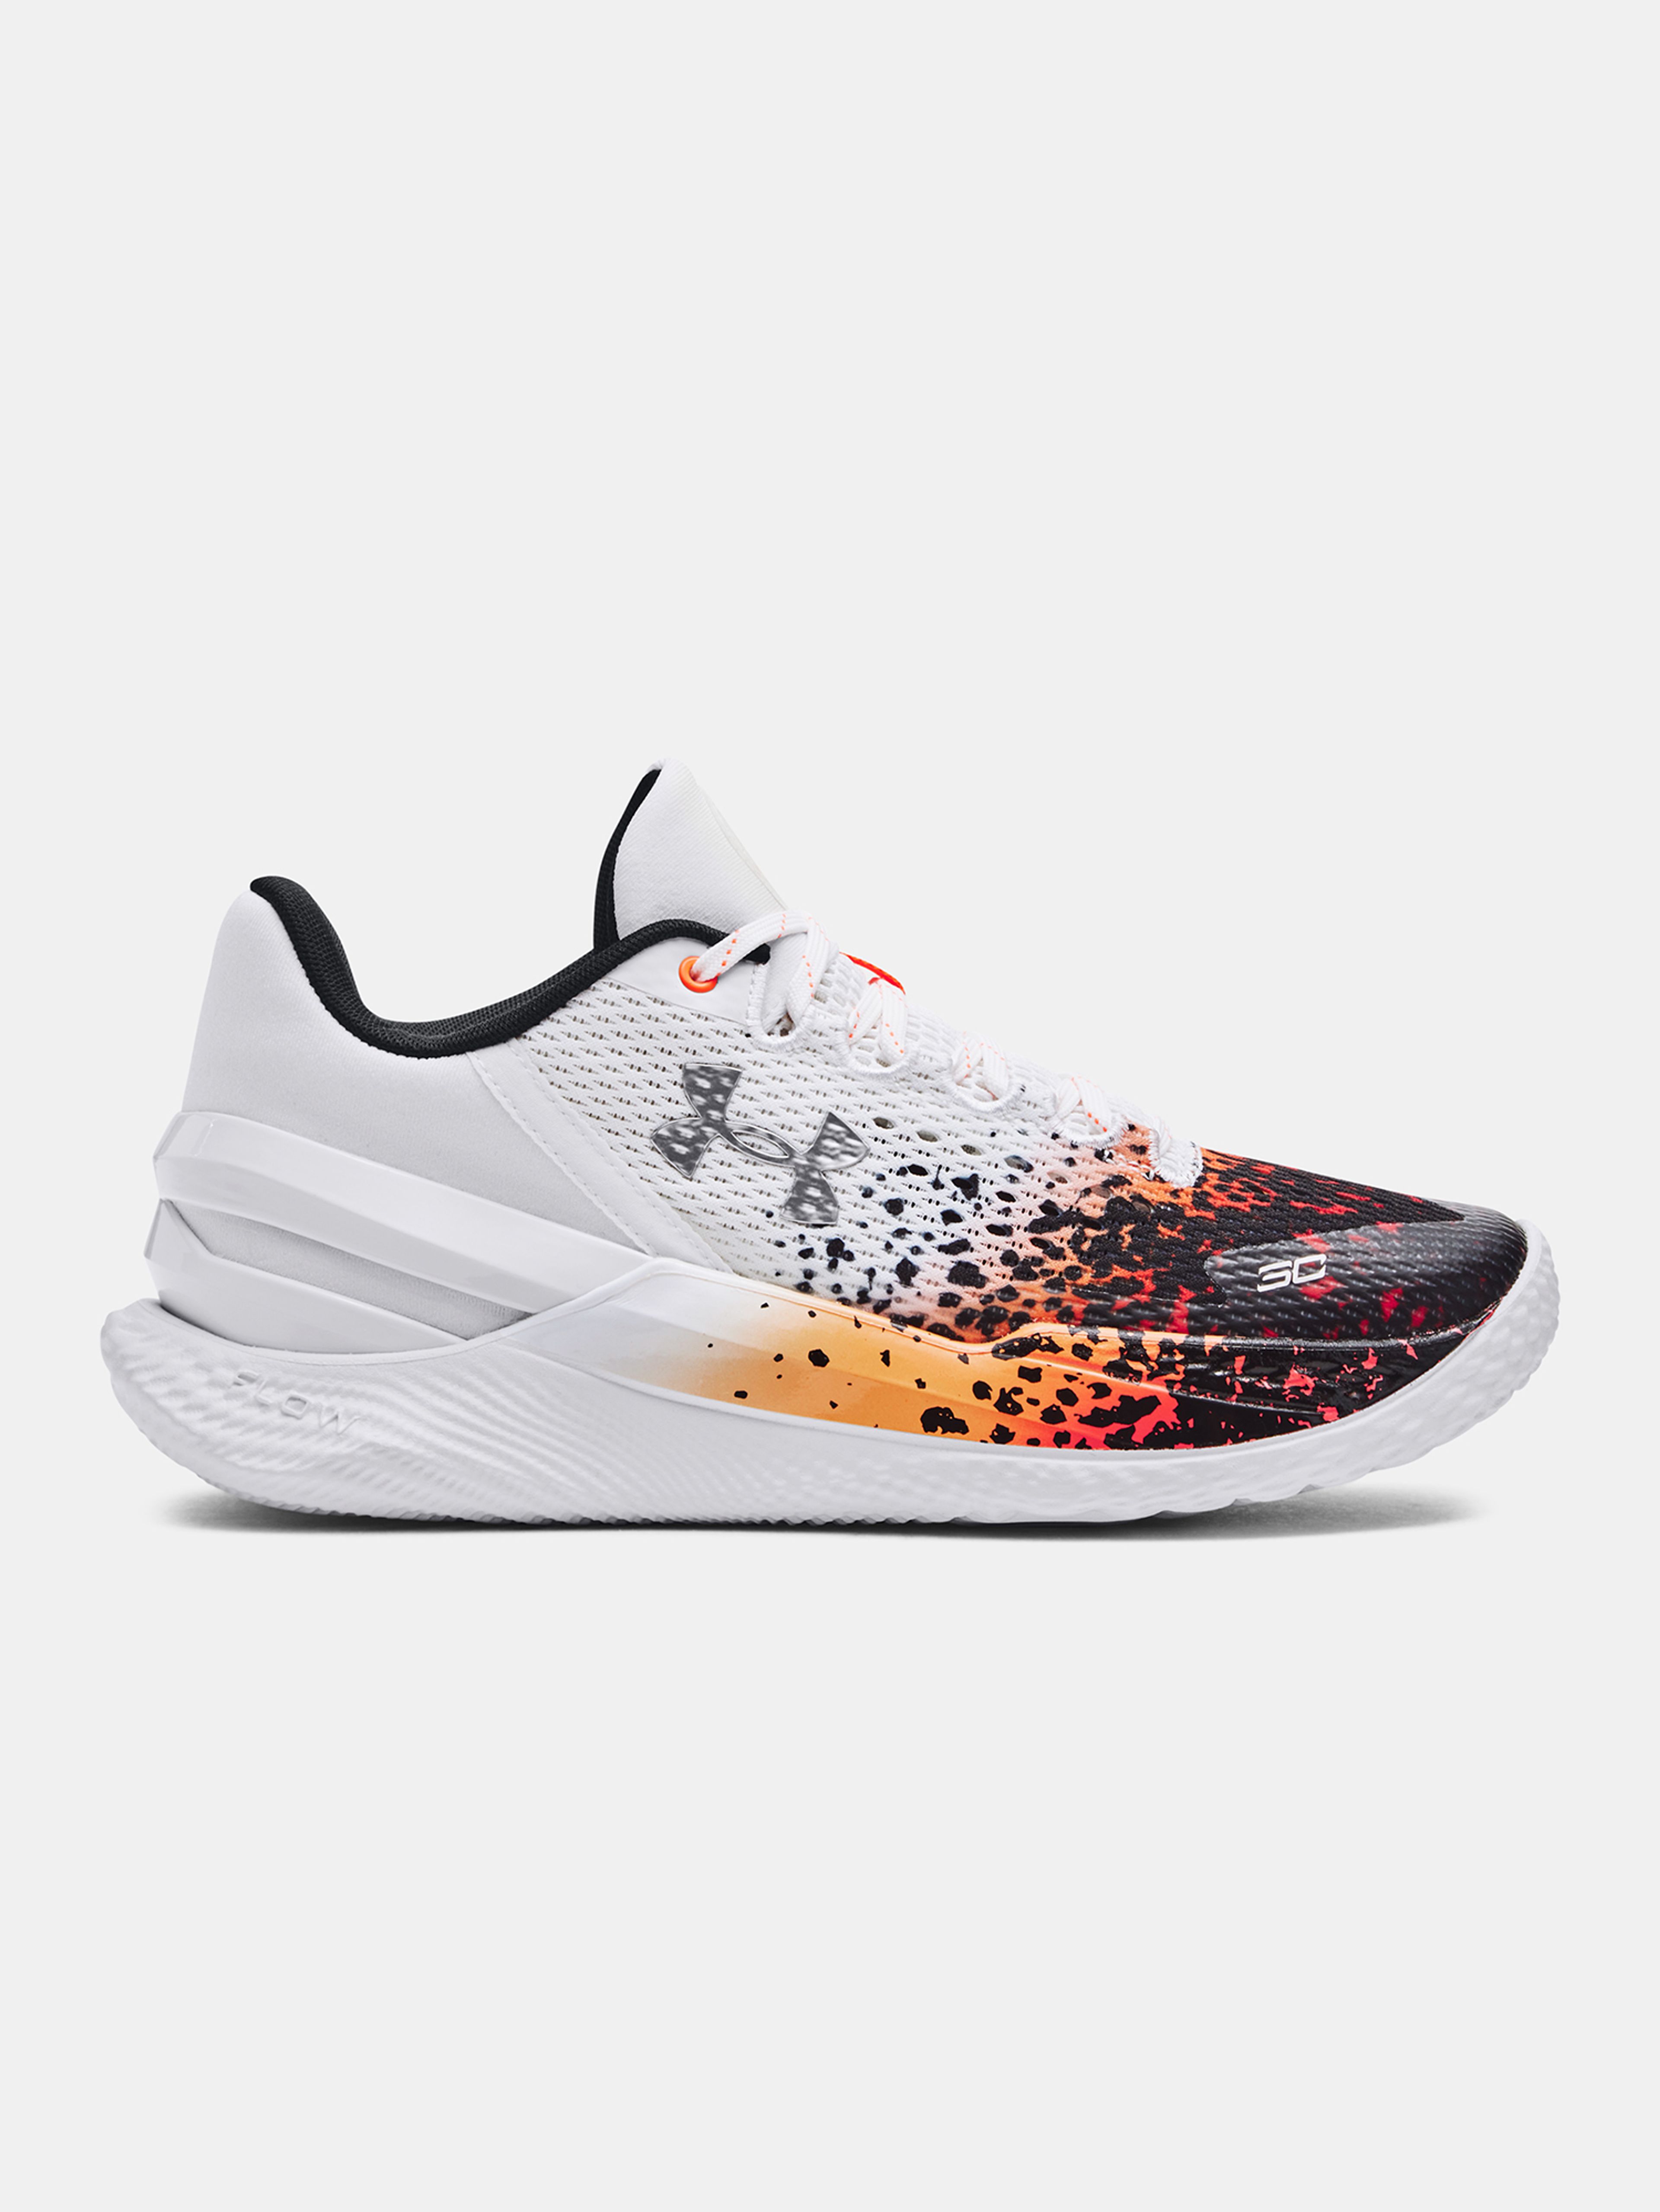 Boty Under Armour CURRY 2 LOW FLOTRO NM-WHT